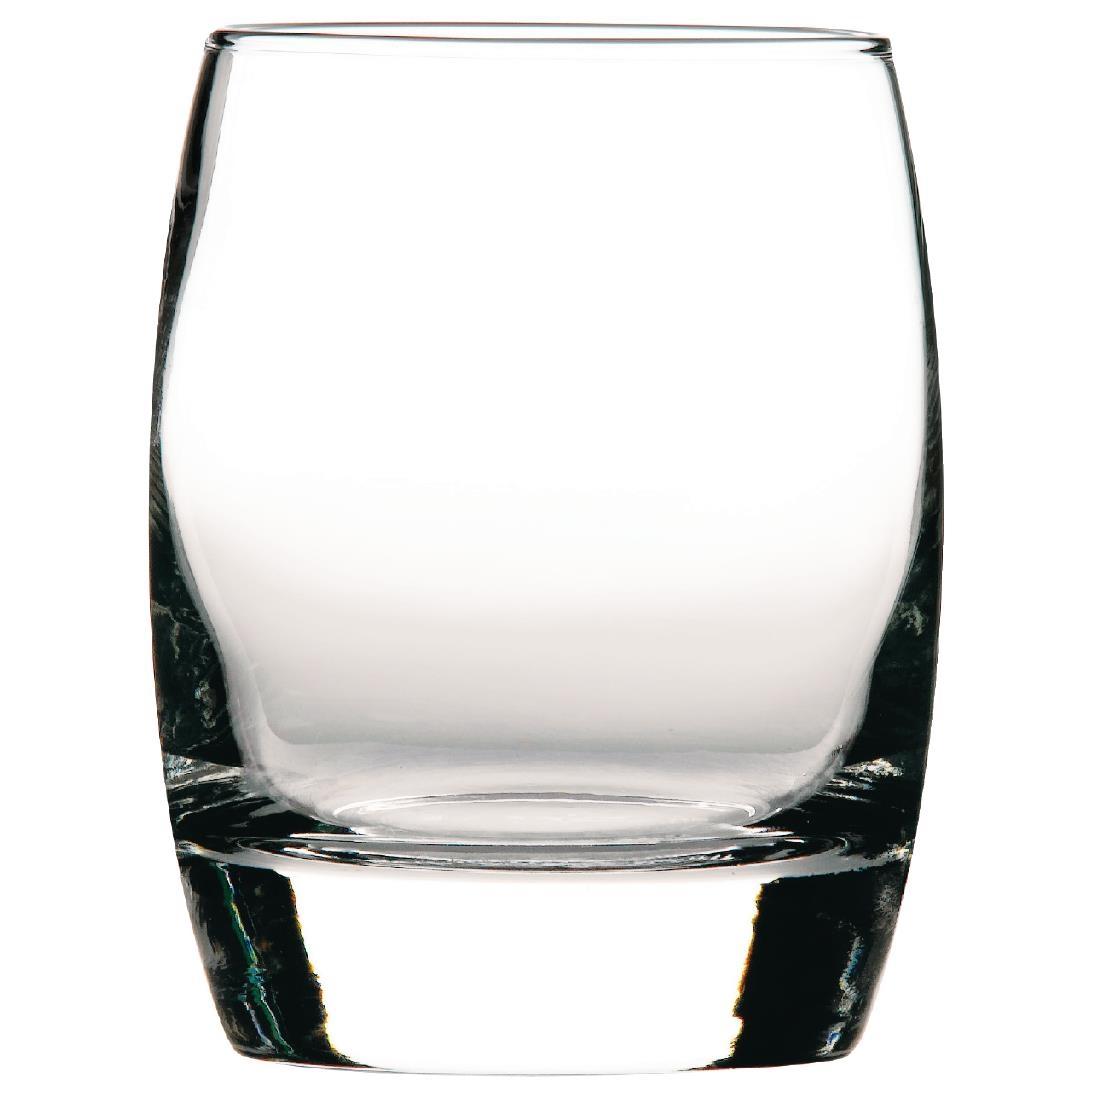 Libbey Endessa Rocks Glass 370ml (Pack of 12) - DH749  - 1